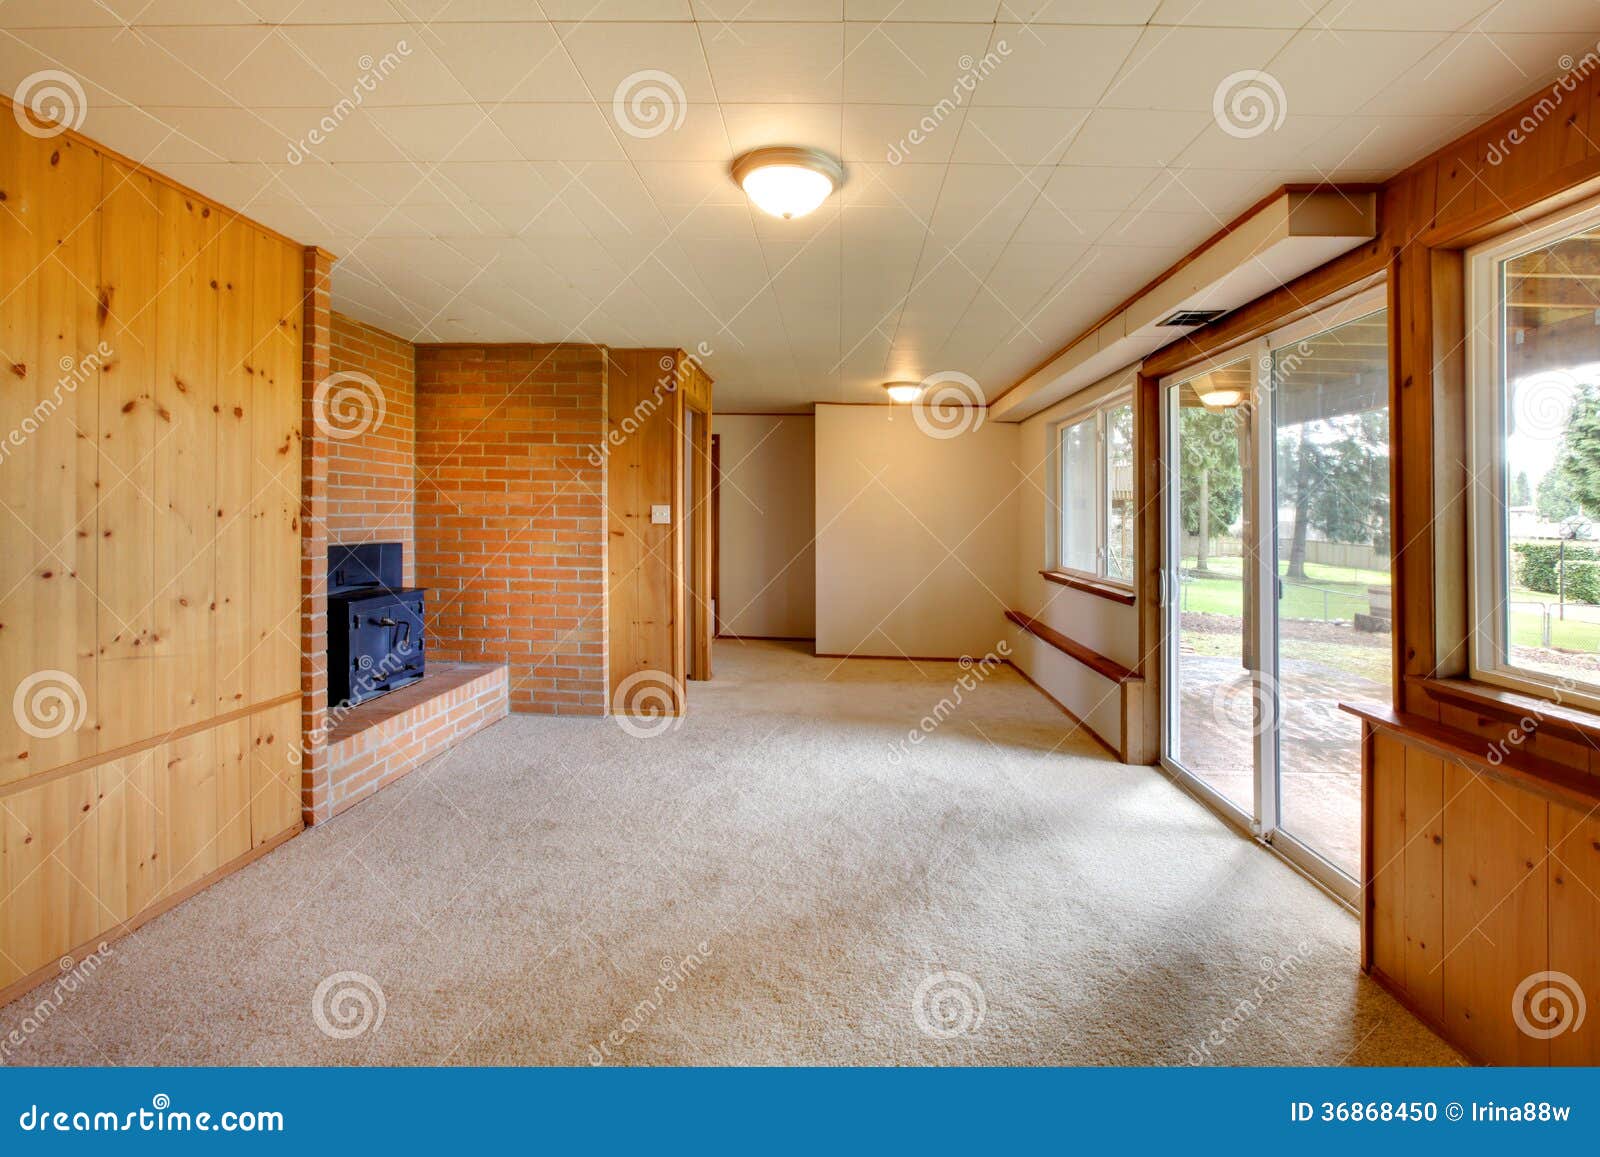 Empty Living Room With Wood Panel Walls And Cast Iron 